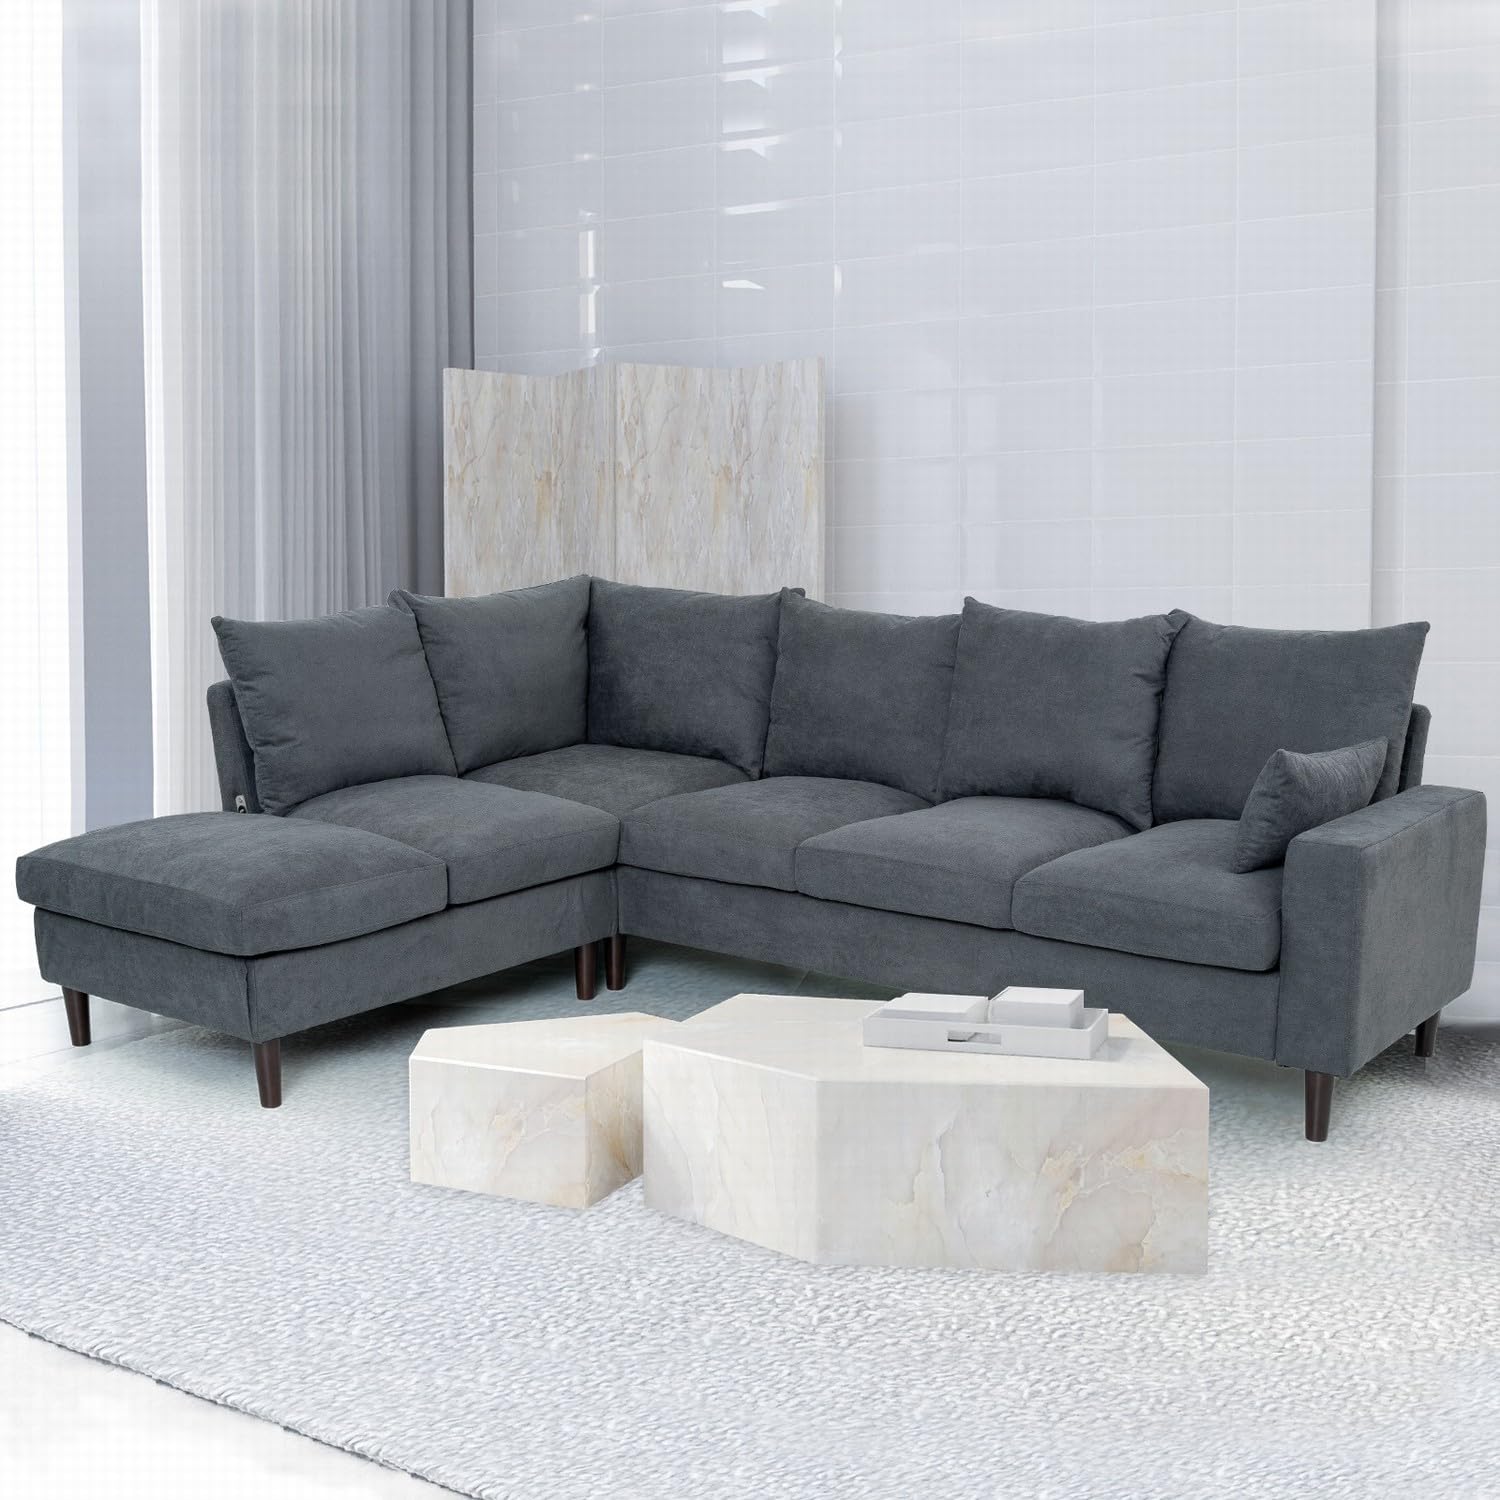 How To Measure Sectional Sofa Dimensions